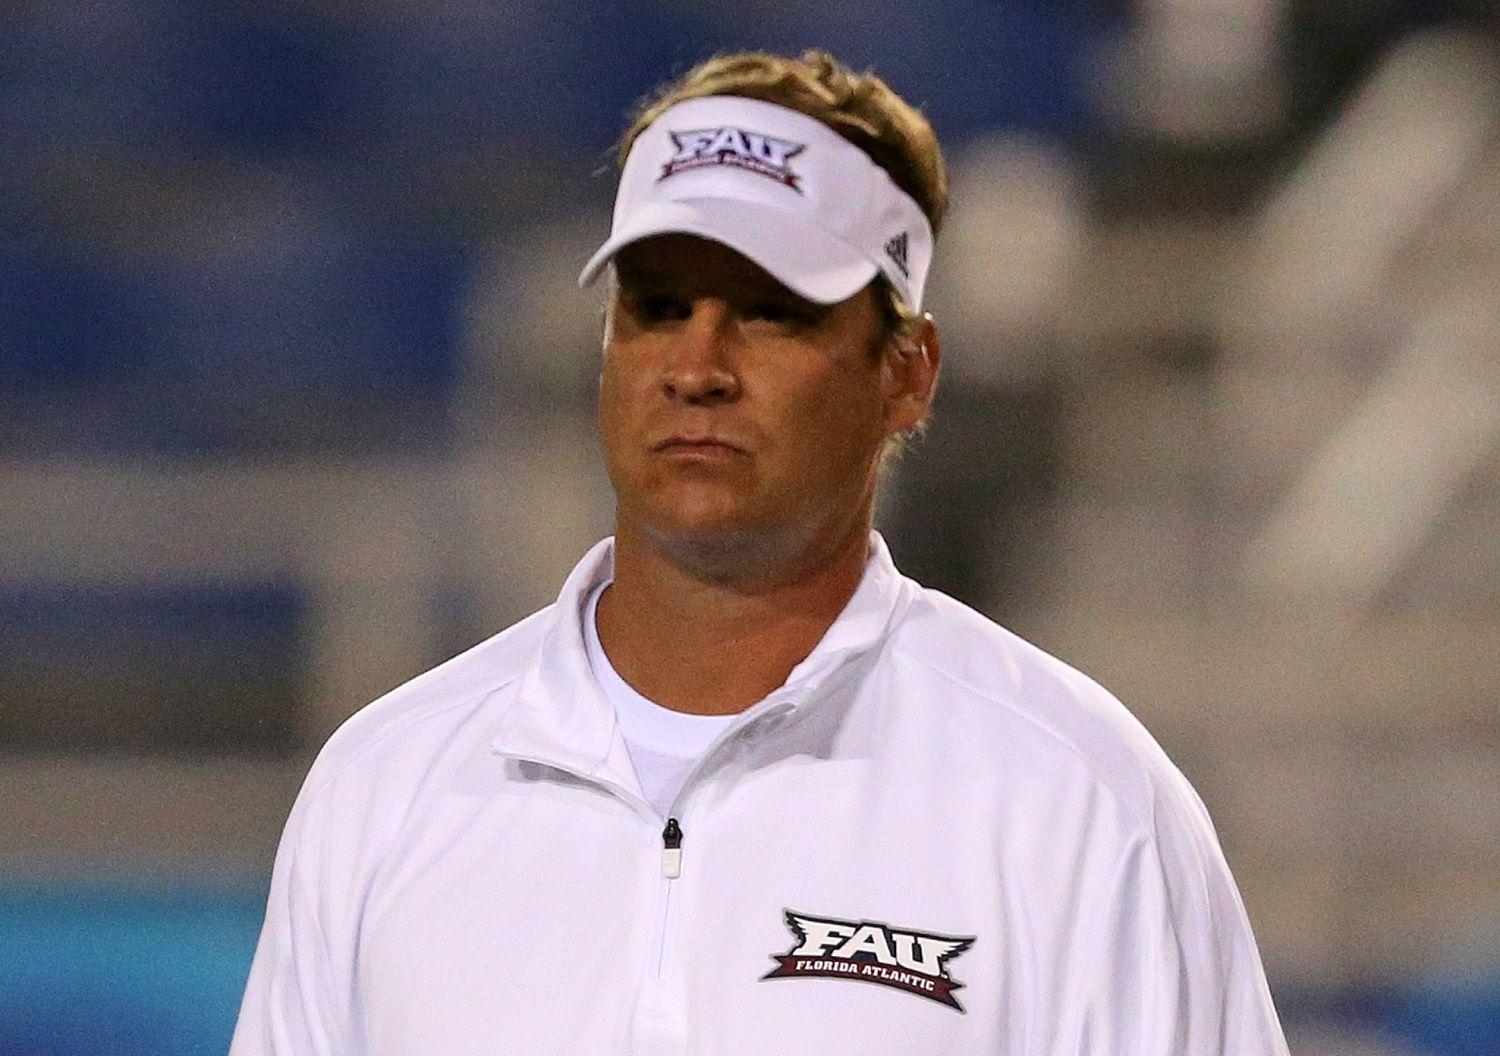 BOCA RATON, FL - NOVEMBER 18: Head coach Lane Kiffin of the Florida Atlantic Owls watches the players warm up prior to the game against the Florida International Golden Panthers at FAU Stadium on November 18, 2017 in Boca Raton, Florida. (Photo by Joel Auerbach/Getty Images)